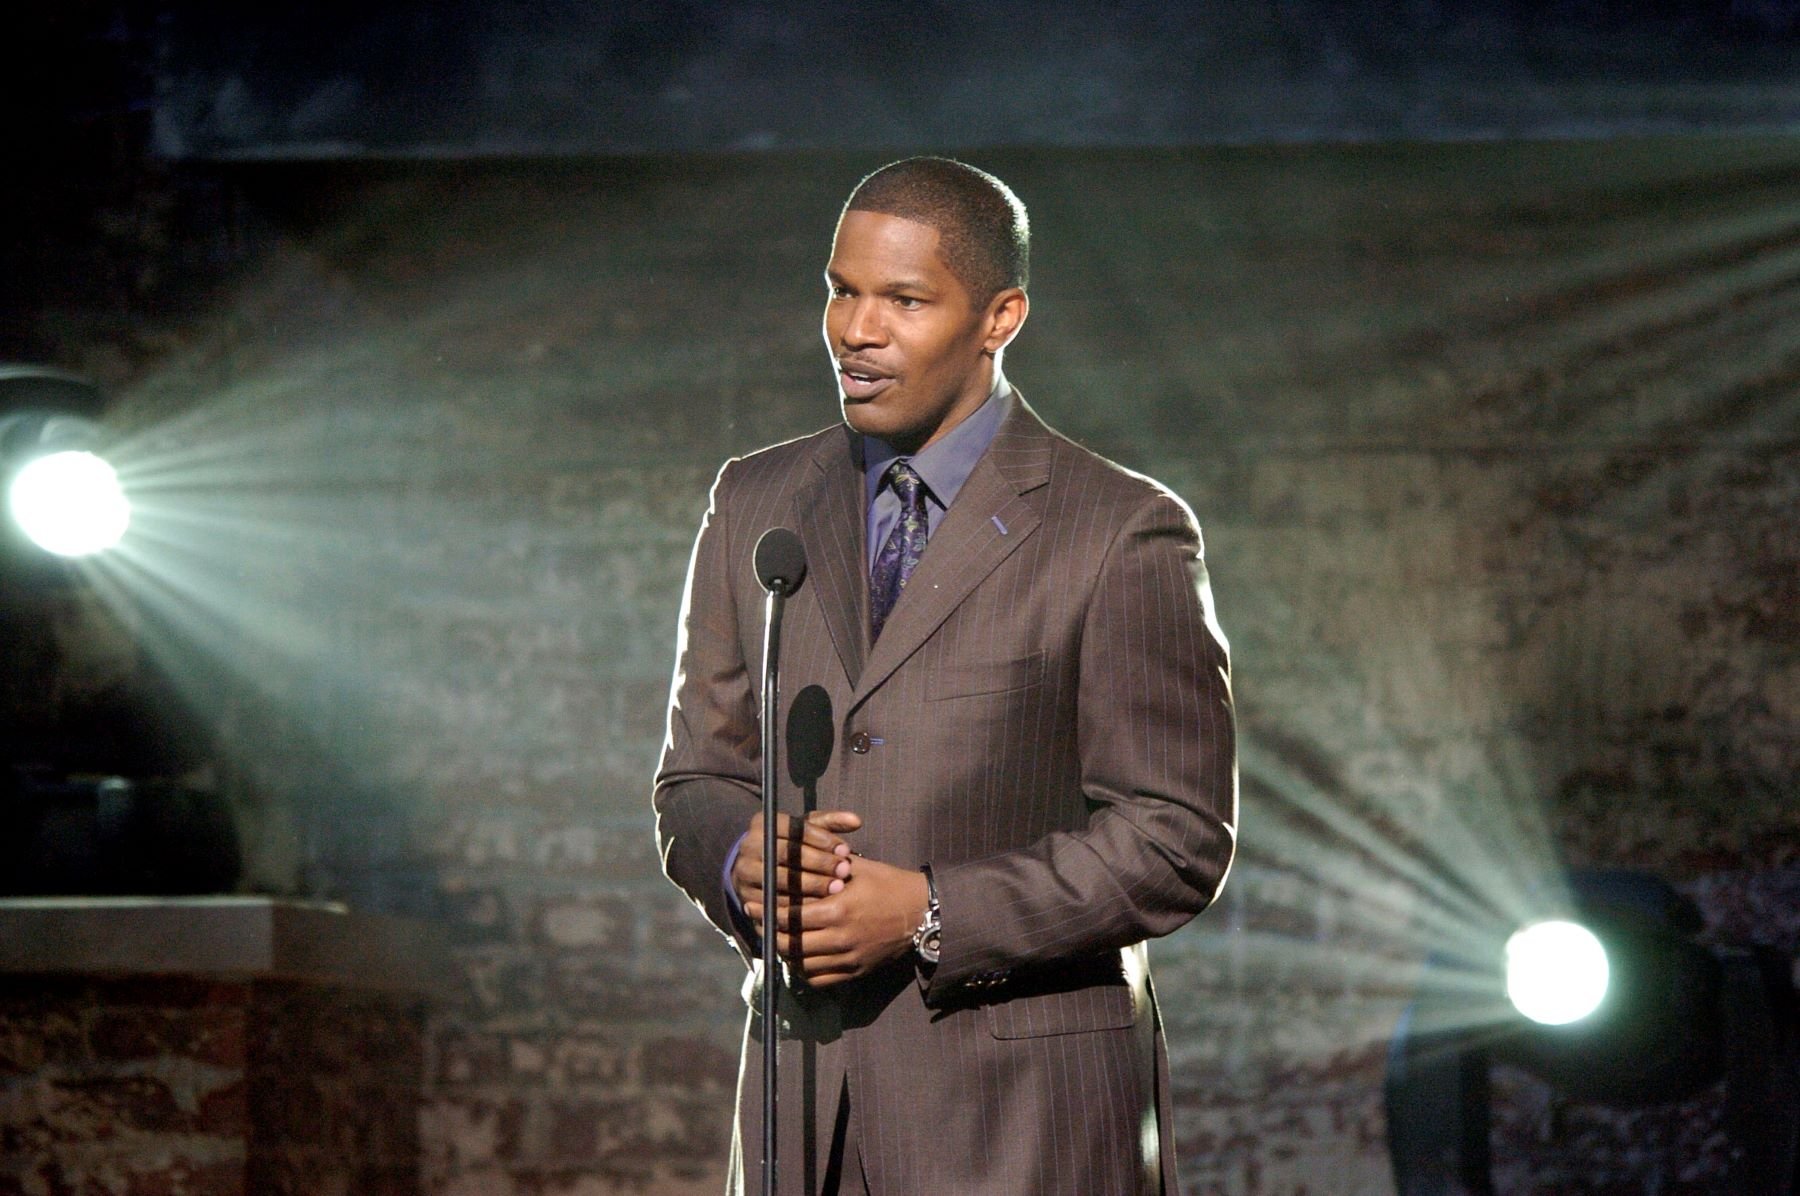 Jamie Foxx at 'Genius A Night For Ray Charles' at the Staples Center in Los Angeles, California